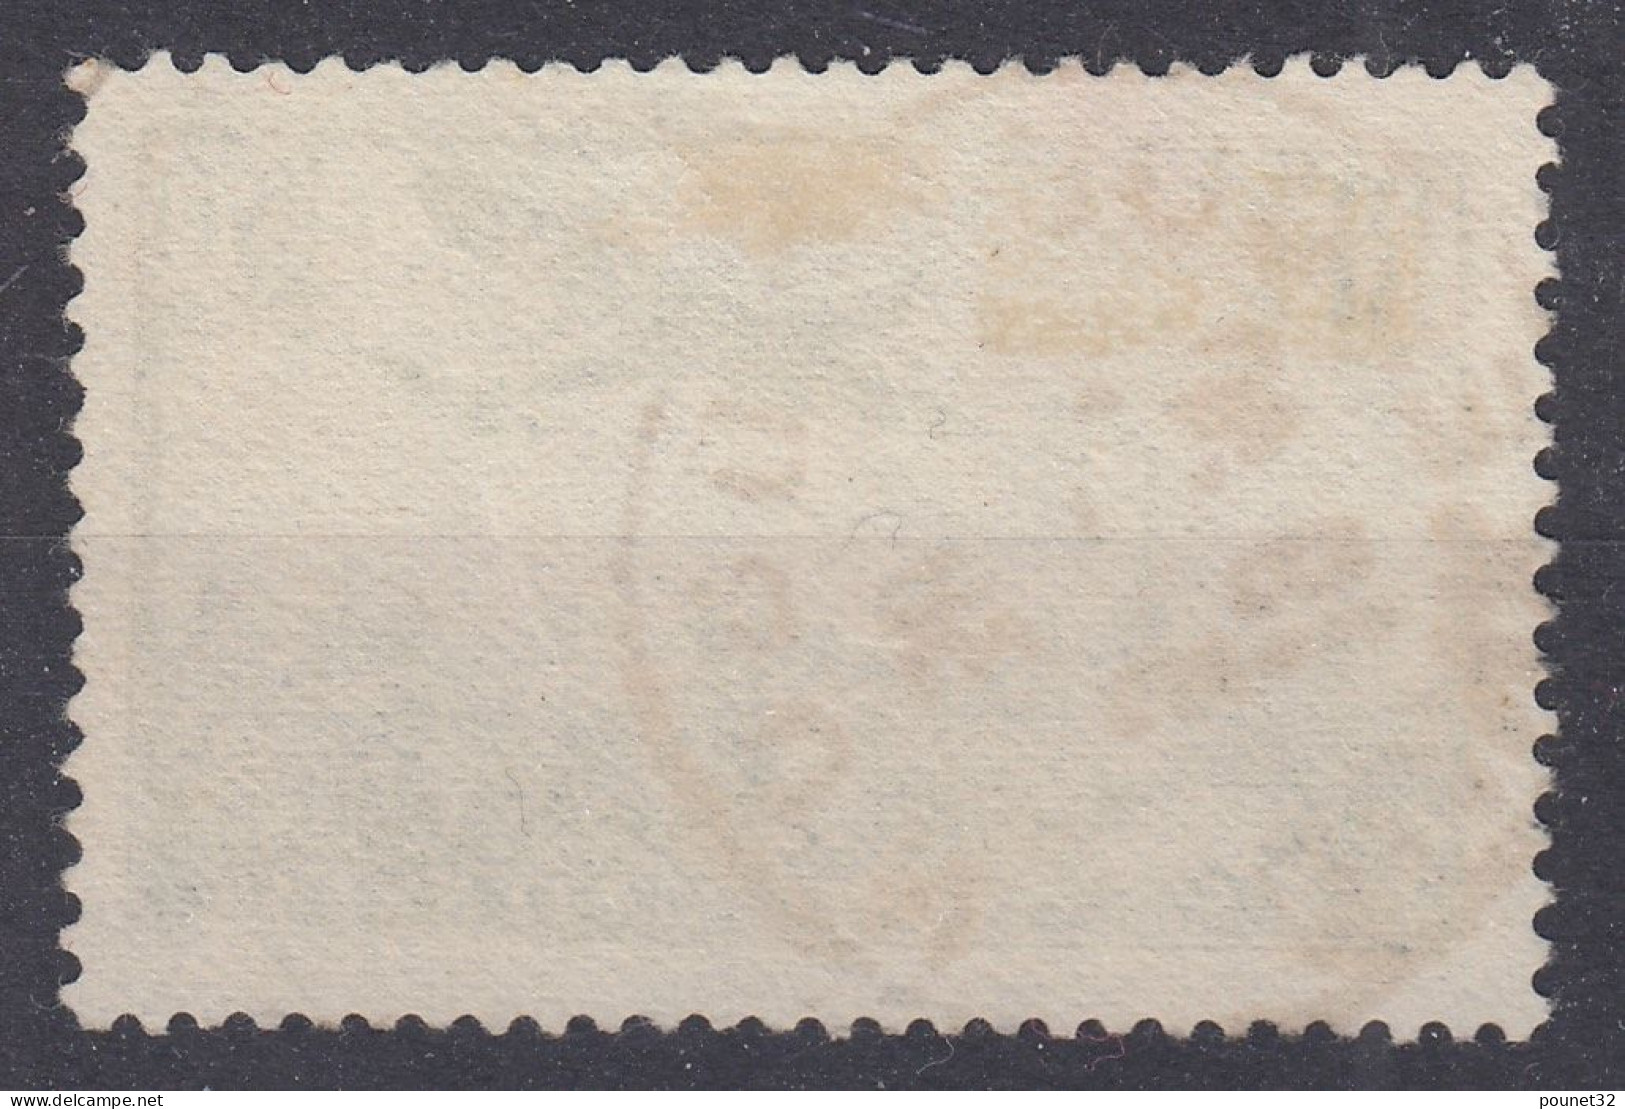 TIMBRE FRANCE POSTE AERIENNE 50F N° 14 OBLITERATION DE DUNKERQUE - COTE 420 € - 1927-1959 Used